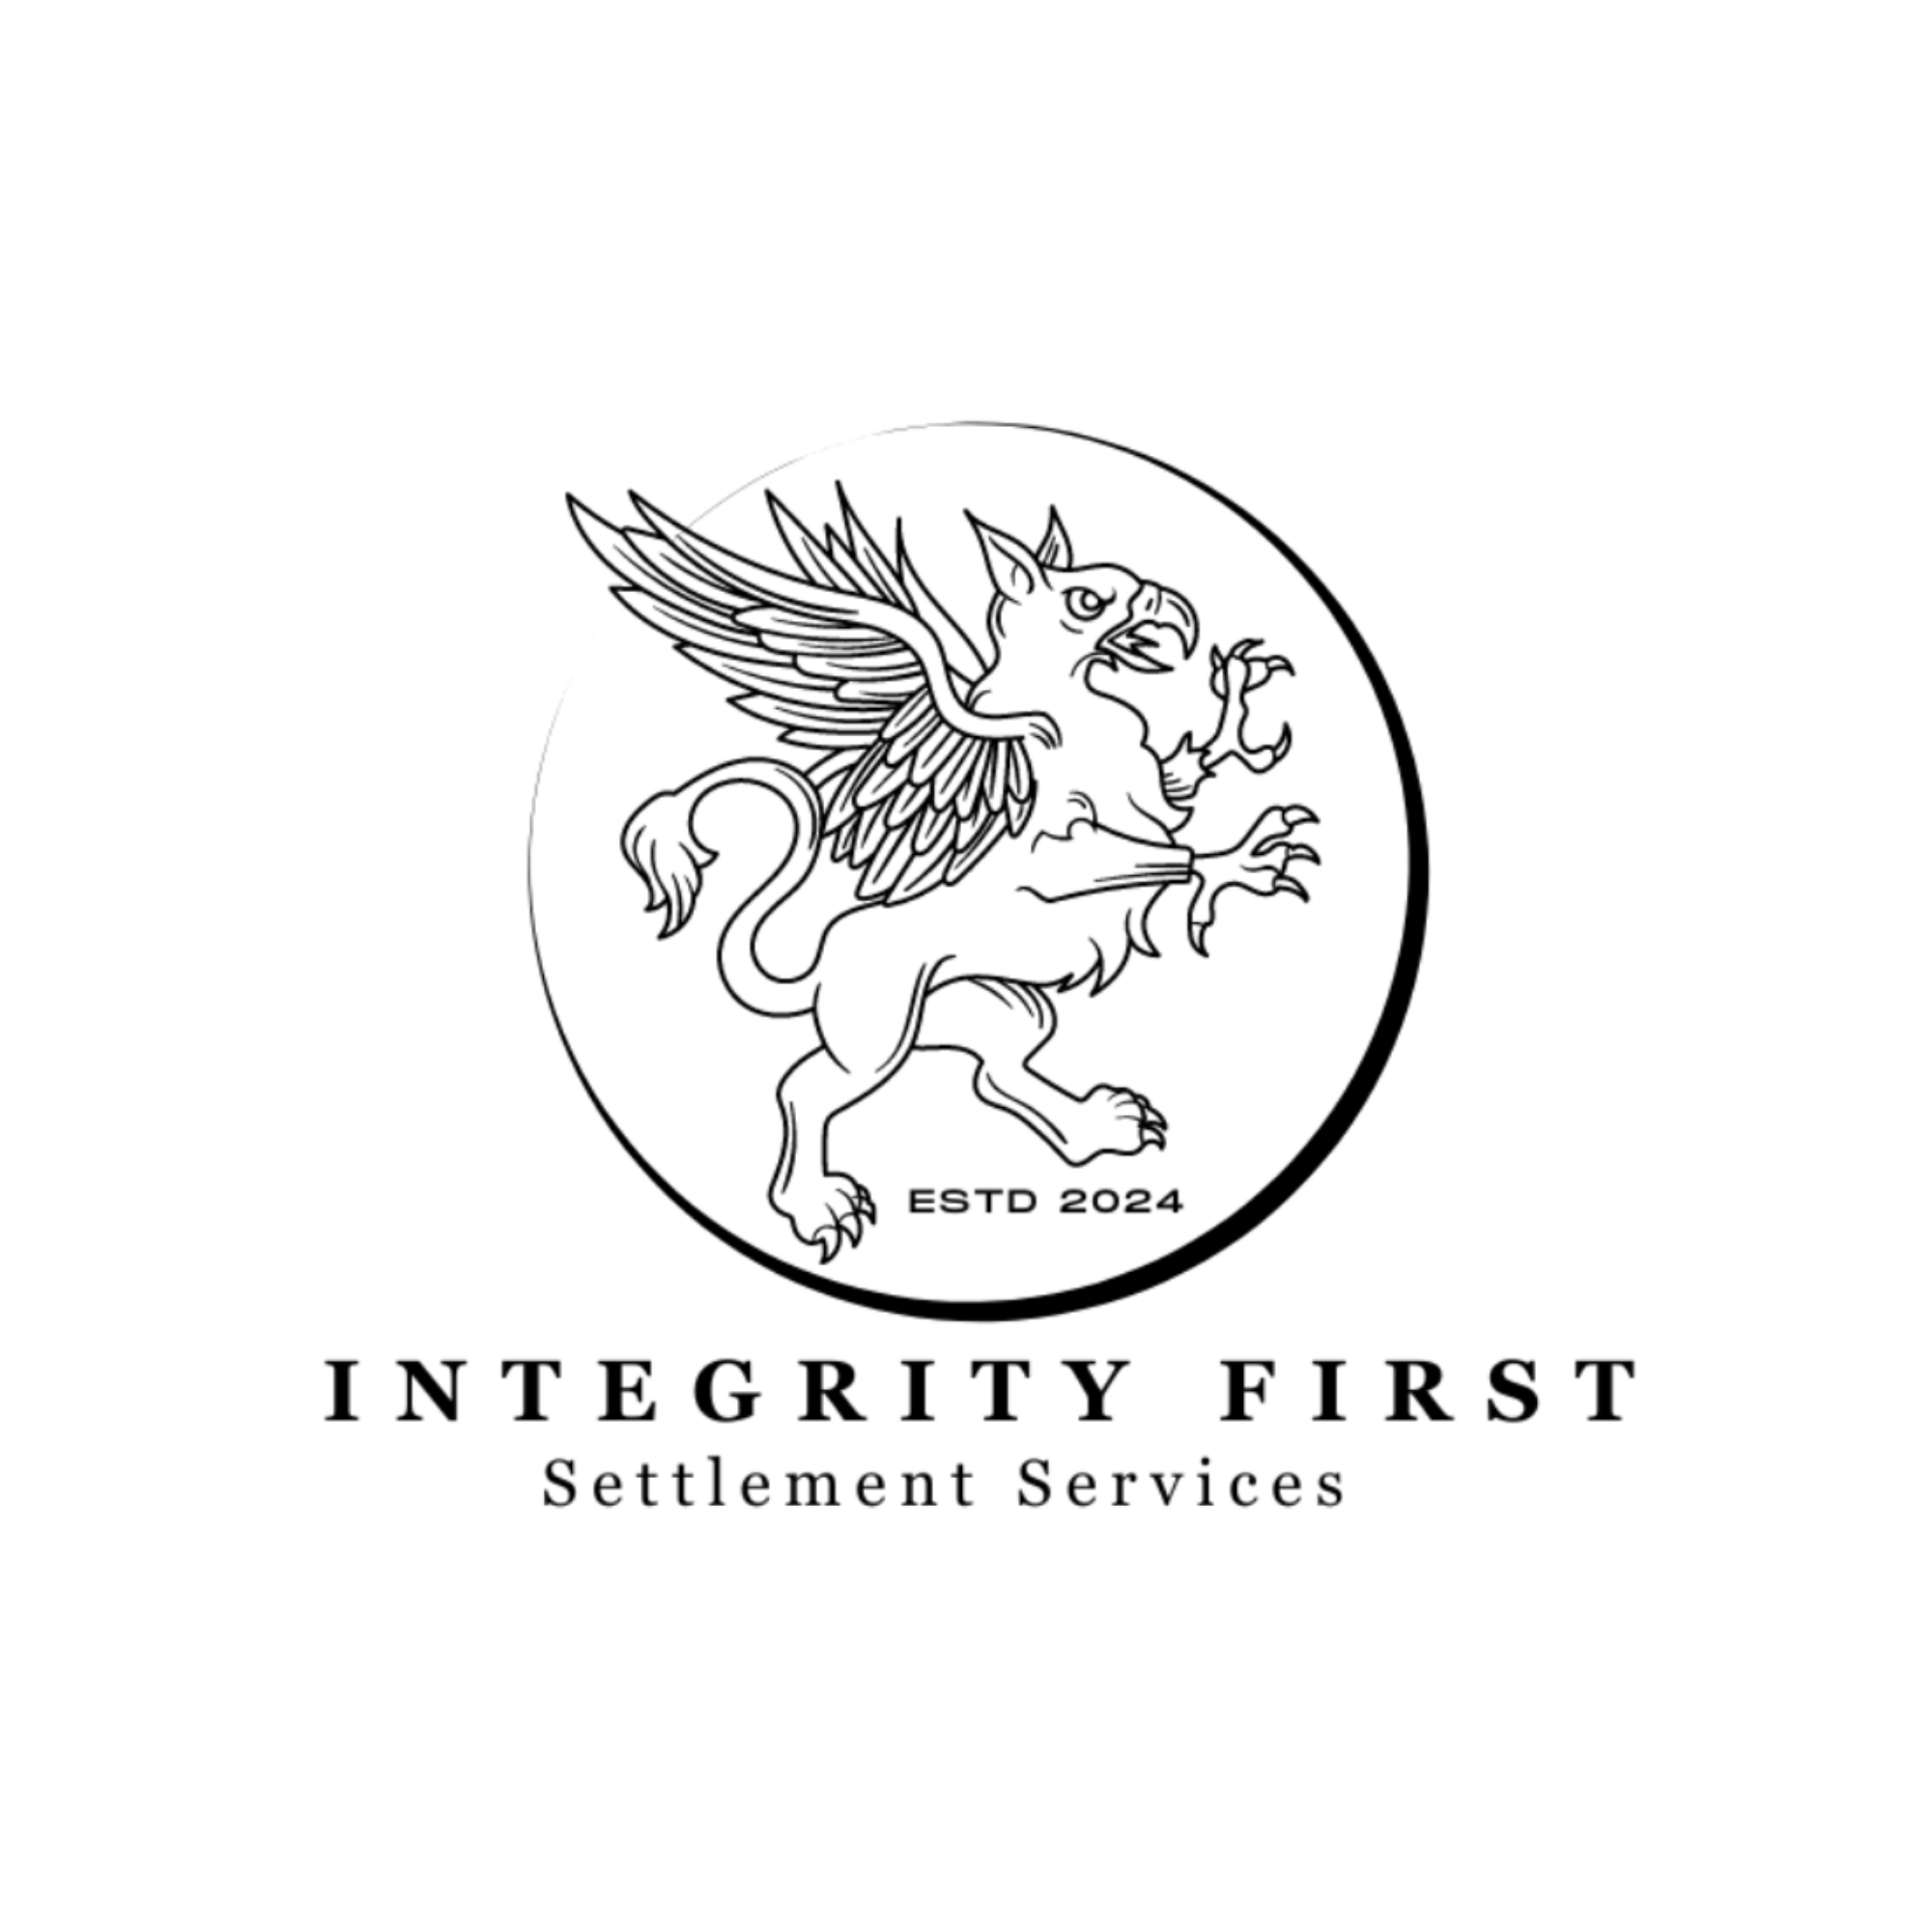 Integrity First Settlement Services